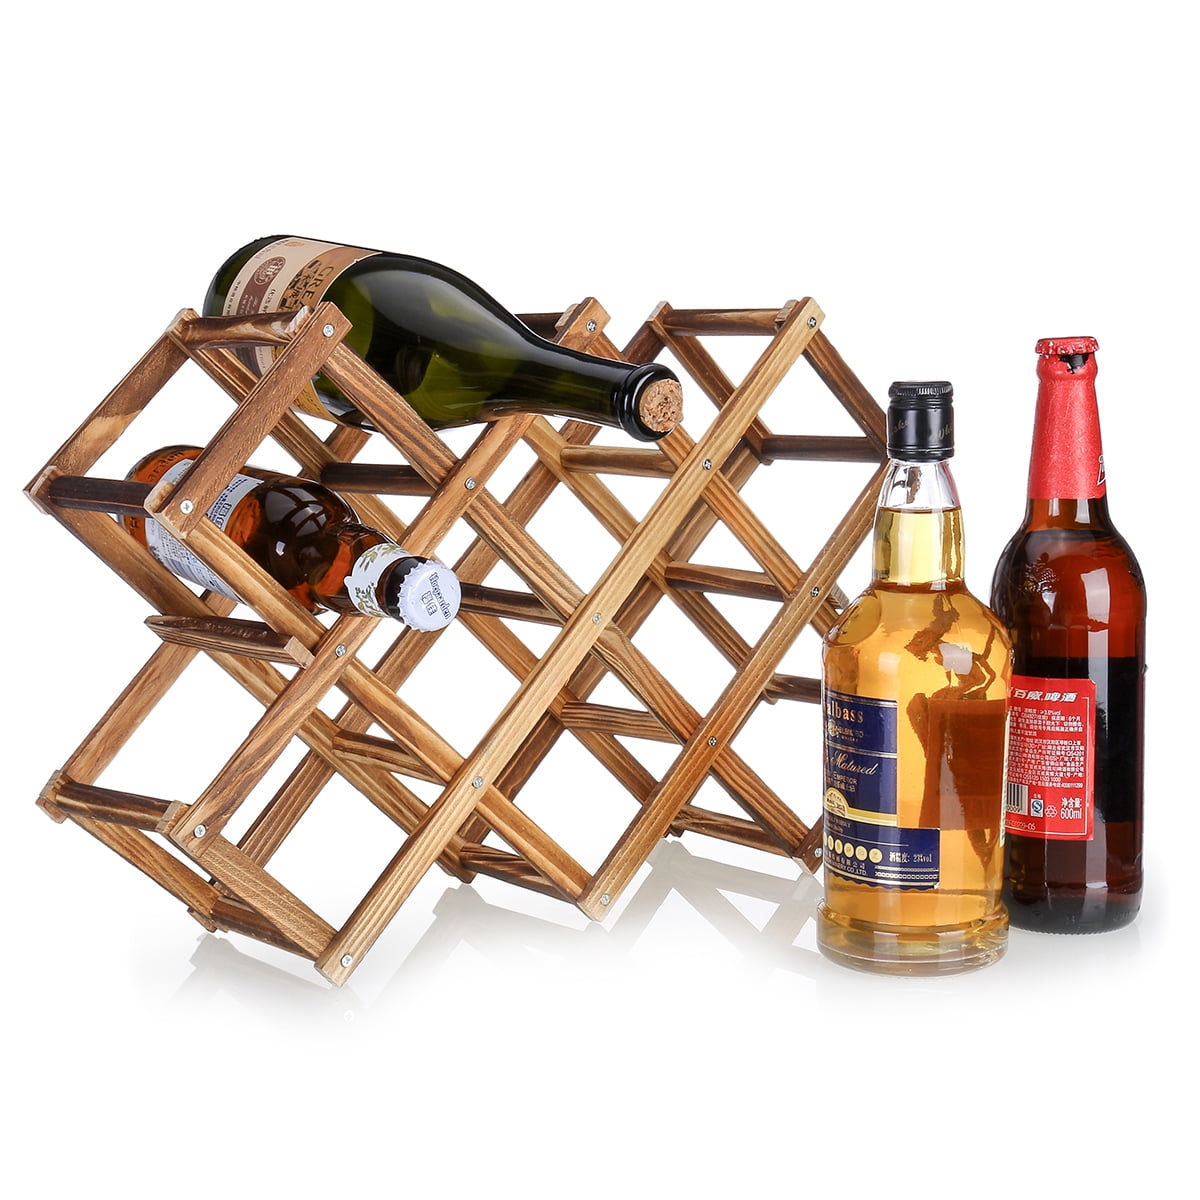 Wooden Wine Rack Small Wine Bottle Stand Holder Storage Free Standing Folding Wooden Racks Countertop Table Organizer Carbonized Wood 5 Slot 